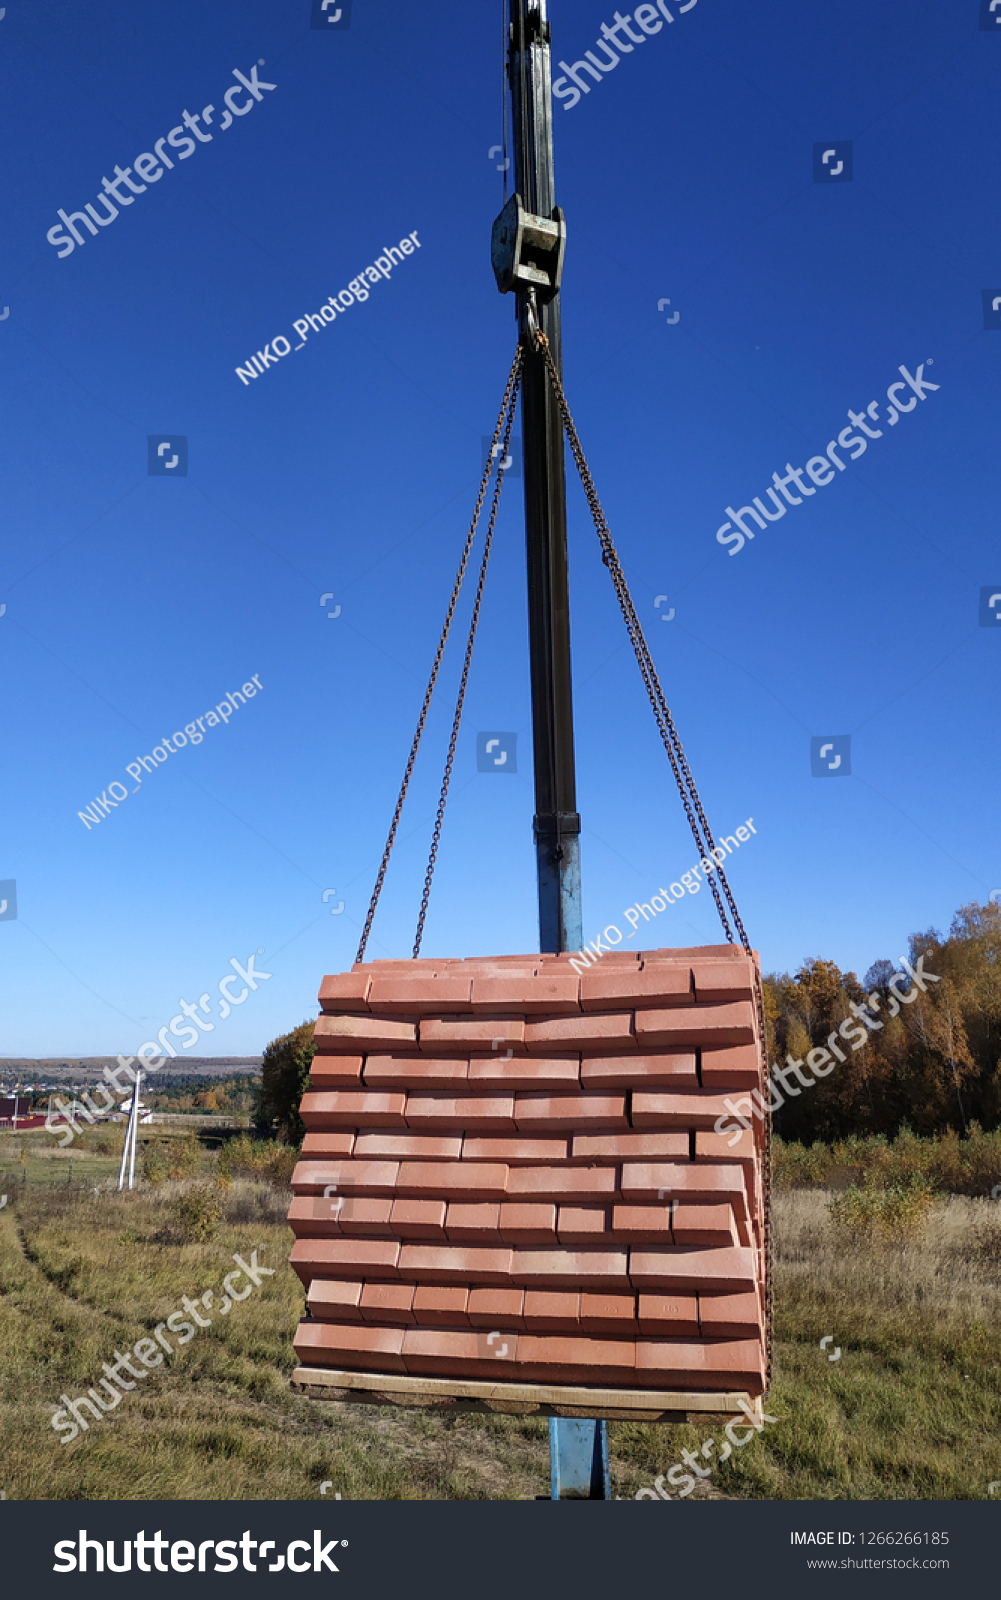 The car crane holds and unloads the brick on the background of the blue autumn sky #1266266185